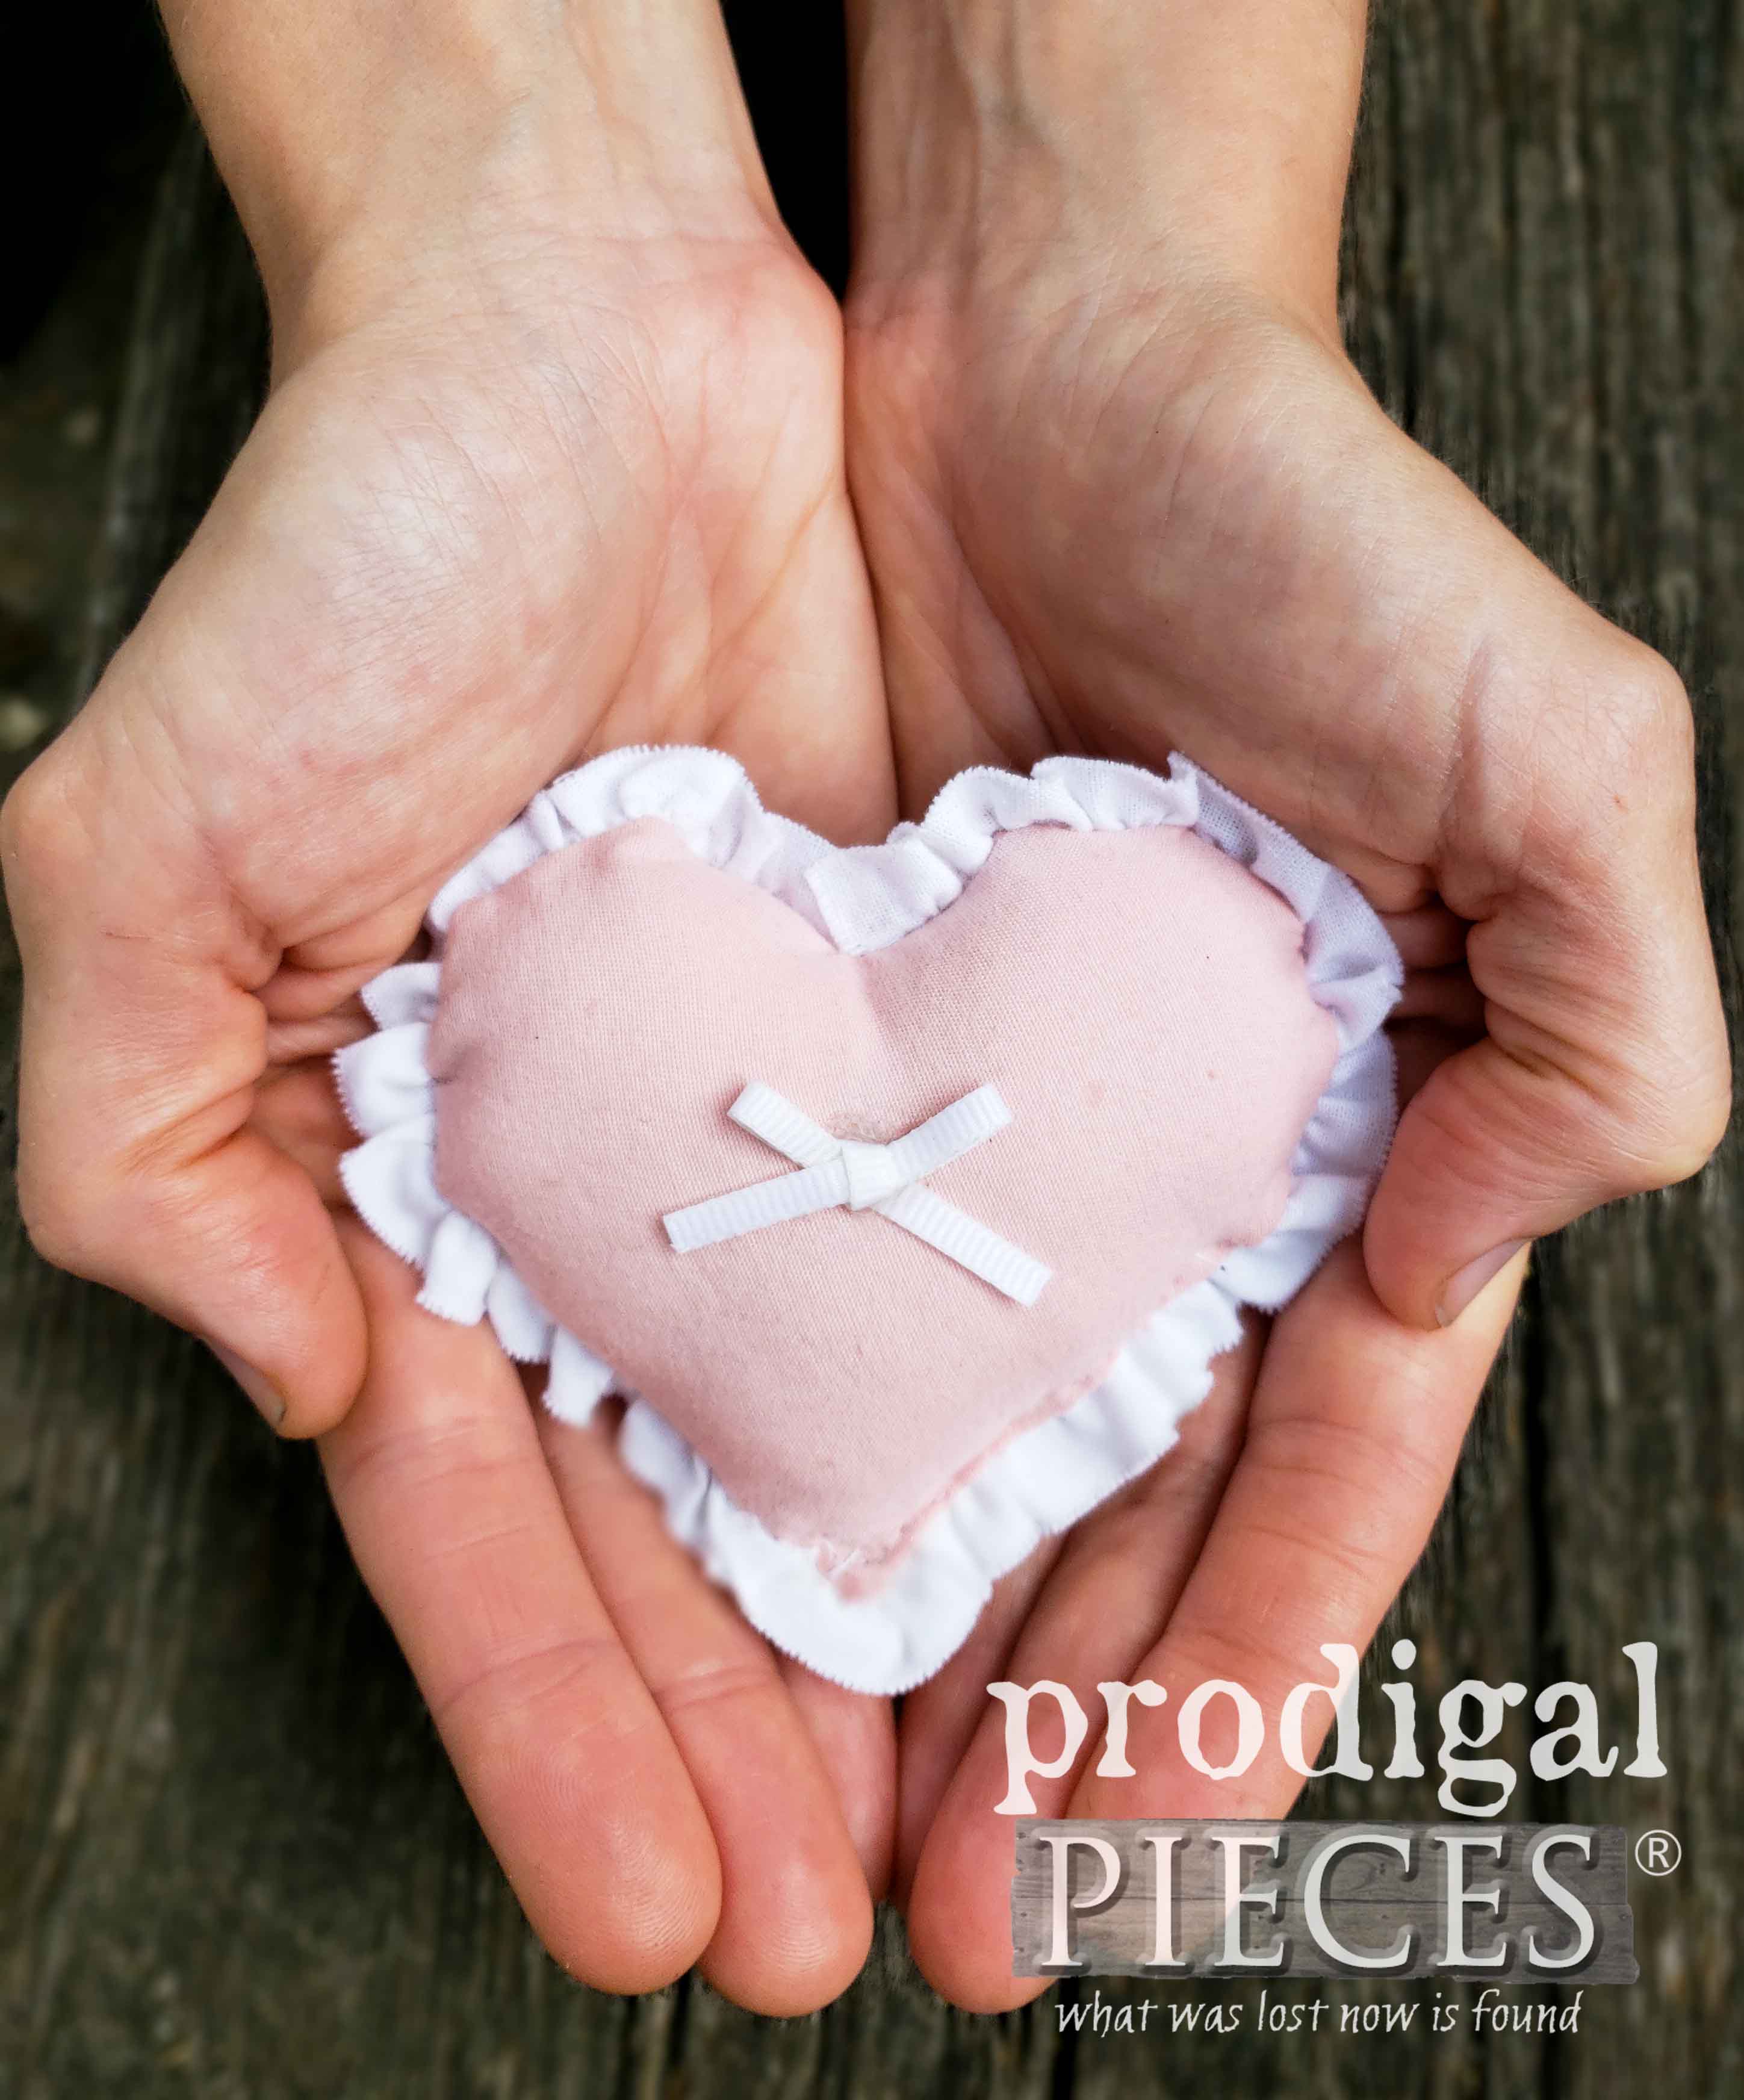 Prodigal Pieces is Giving Back and Finding Home. Submit and honoree today! Detail on Finding Home Program at Prodigal Pieces | prodigalpieces.com